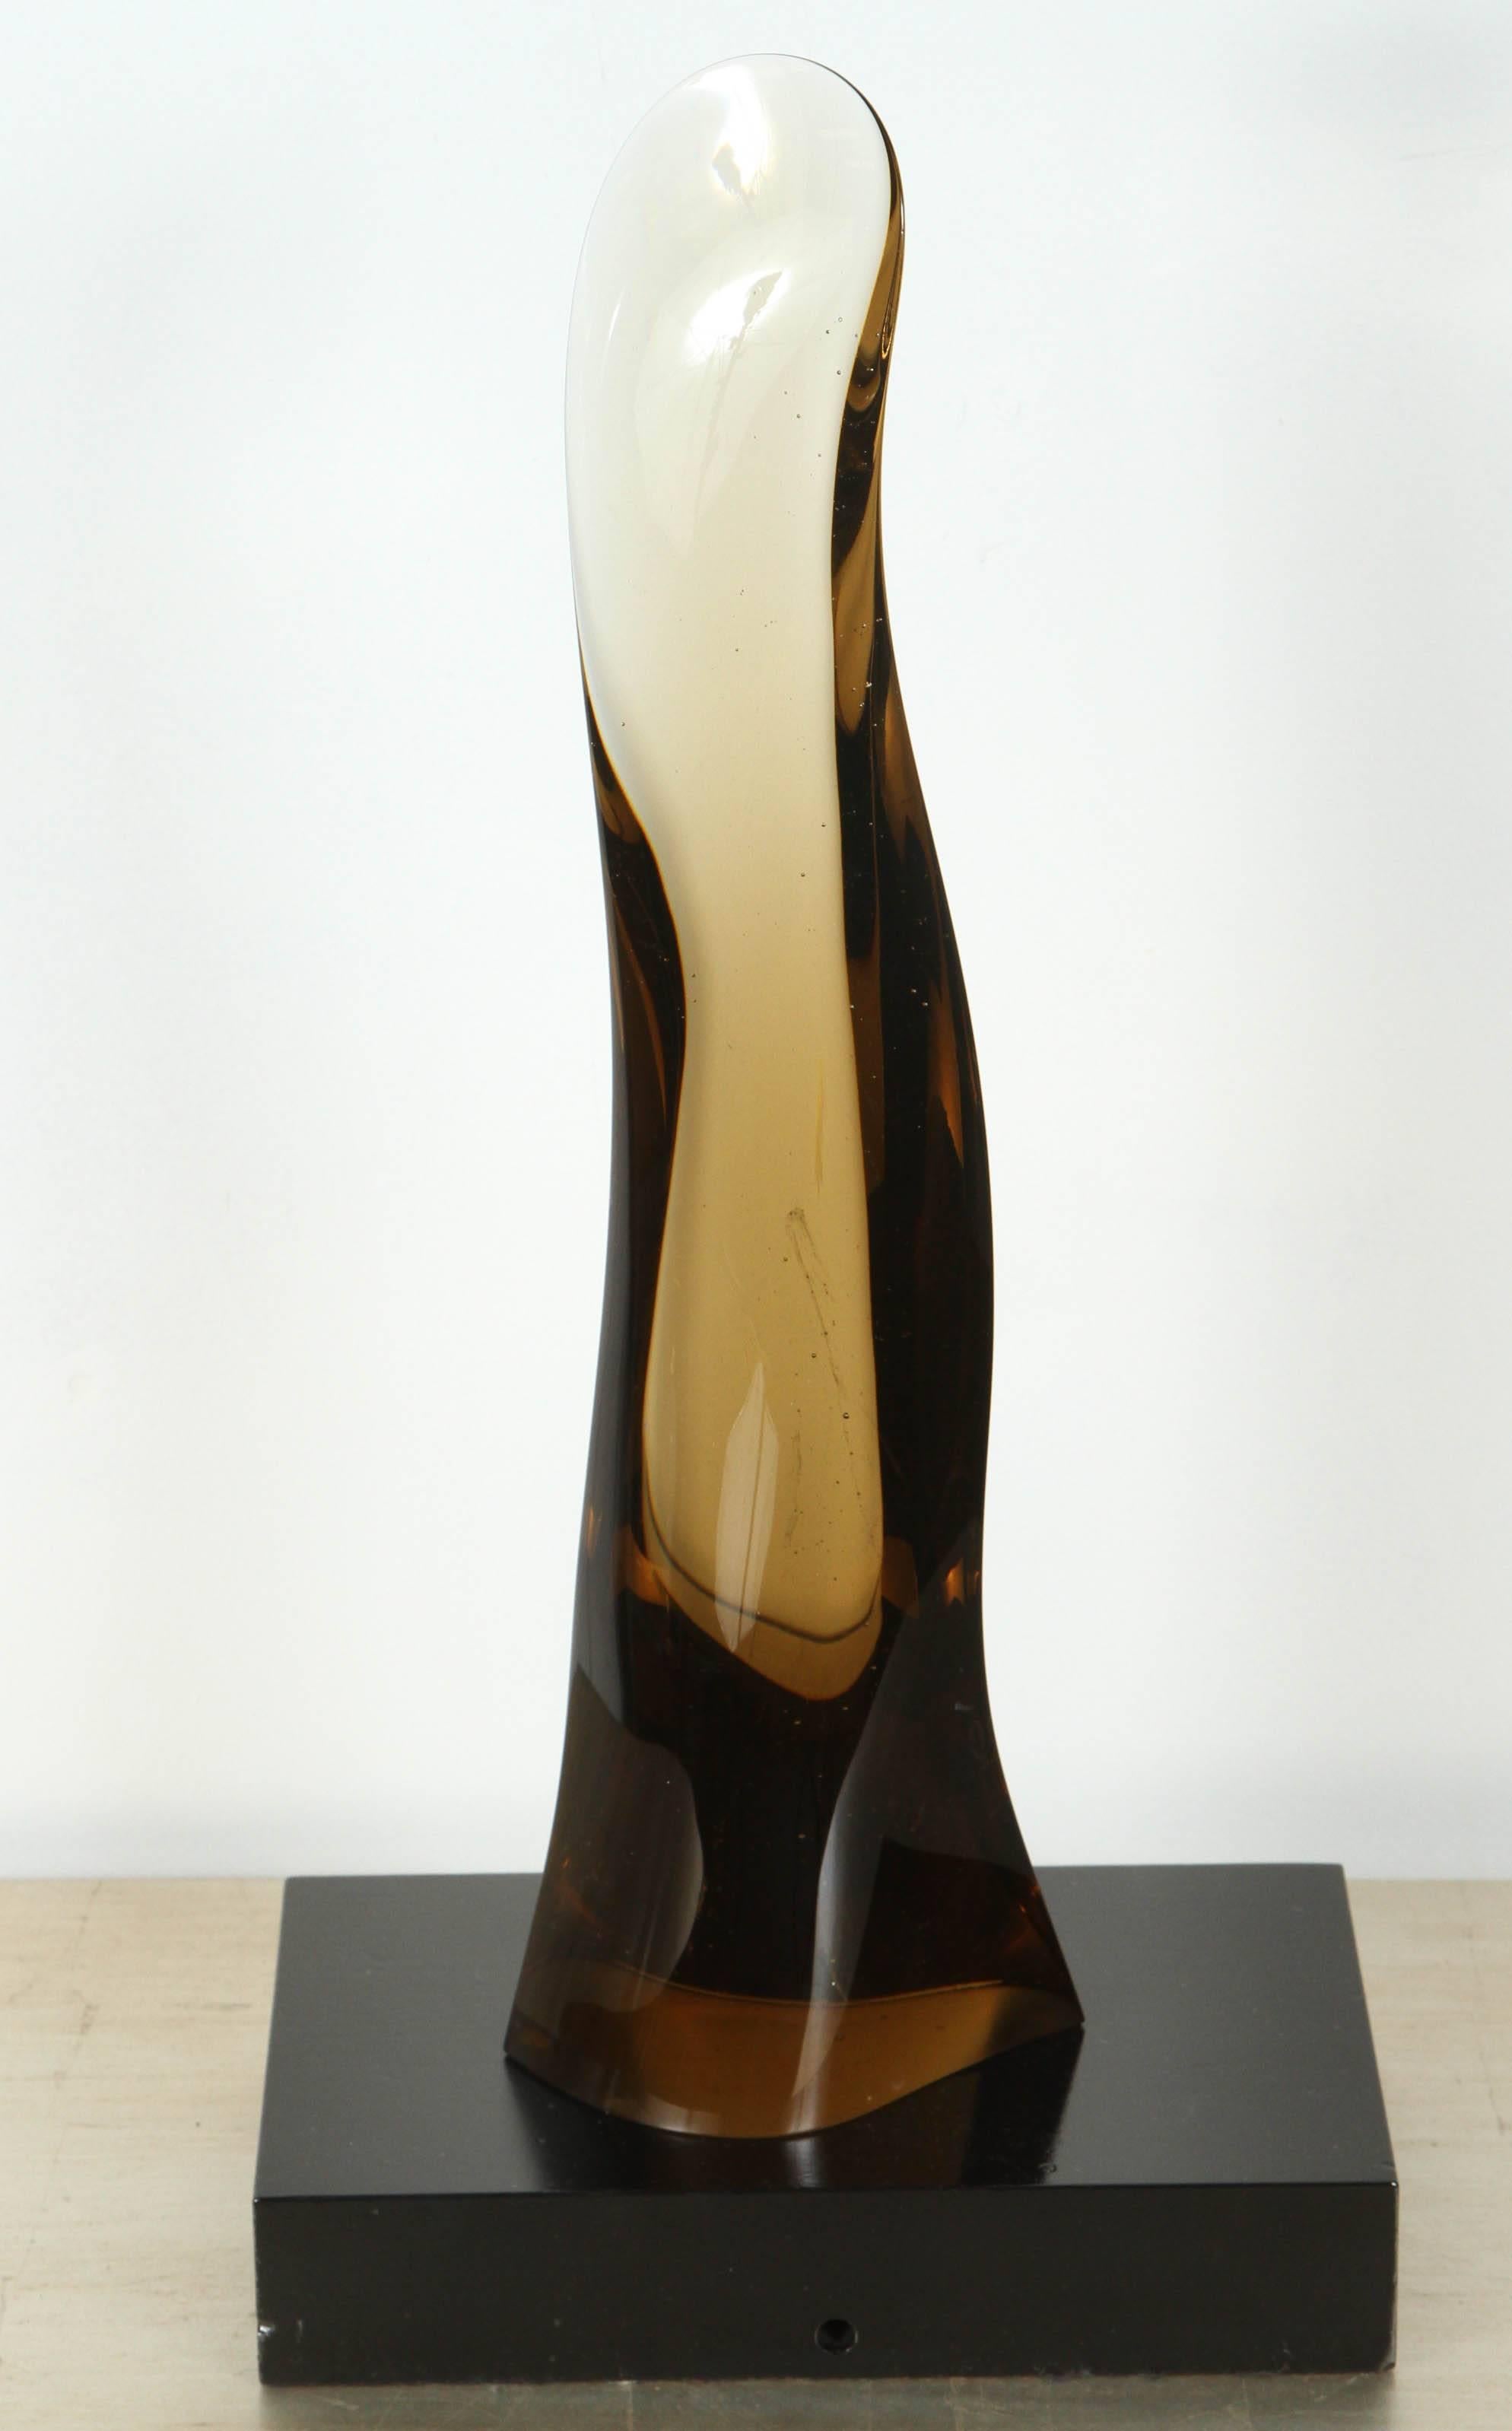 American Sleek 1970s Smoked Glass Sculpture For Sale